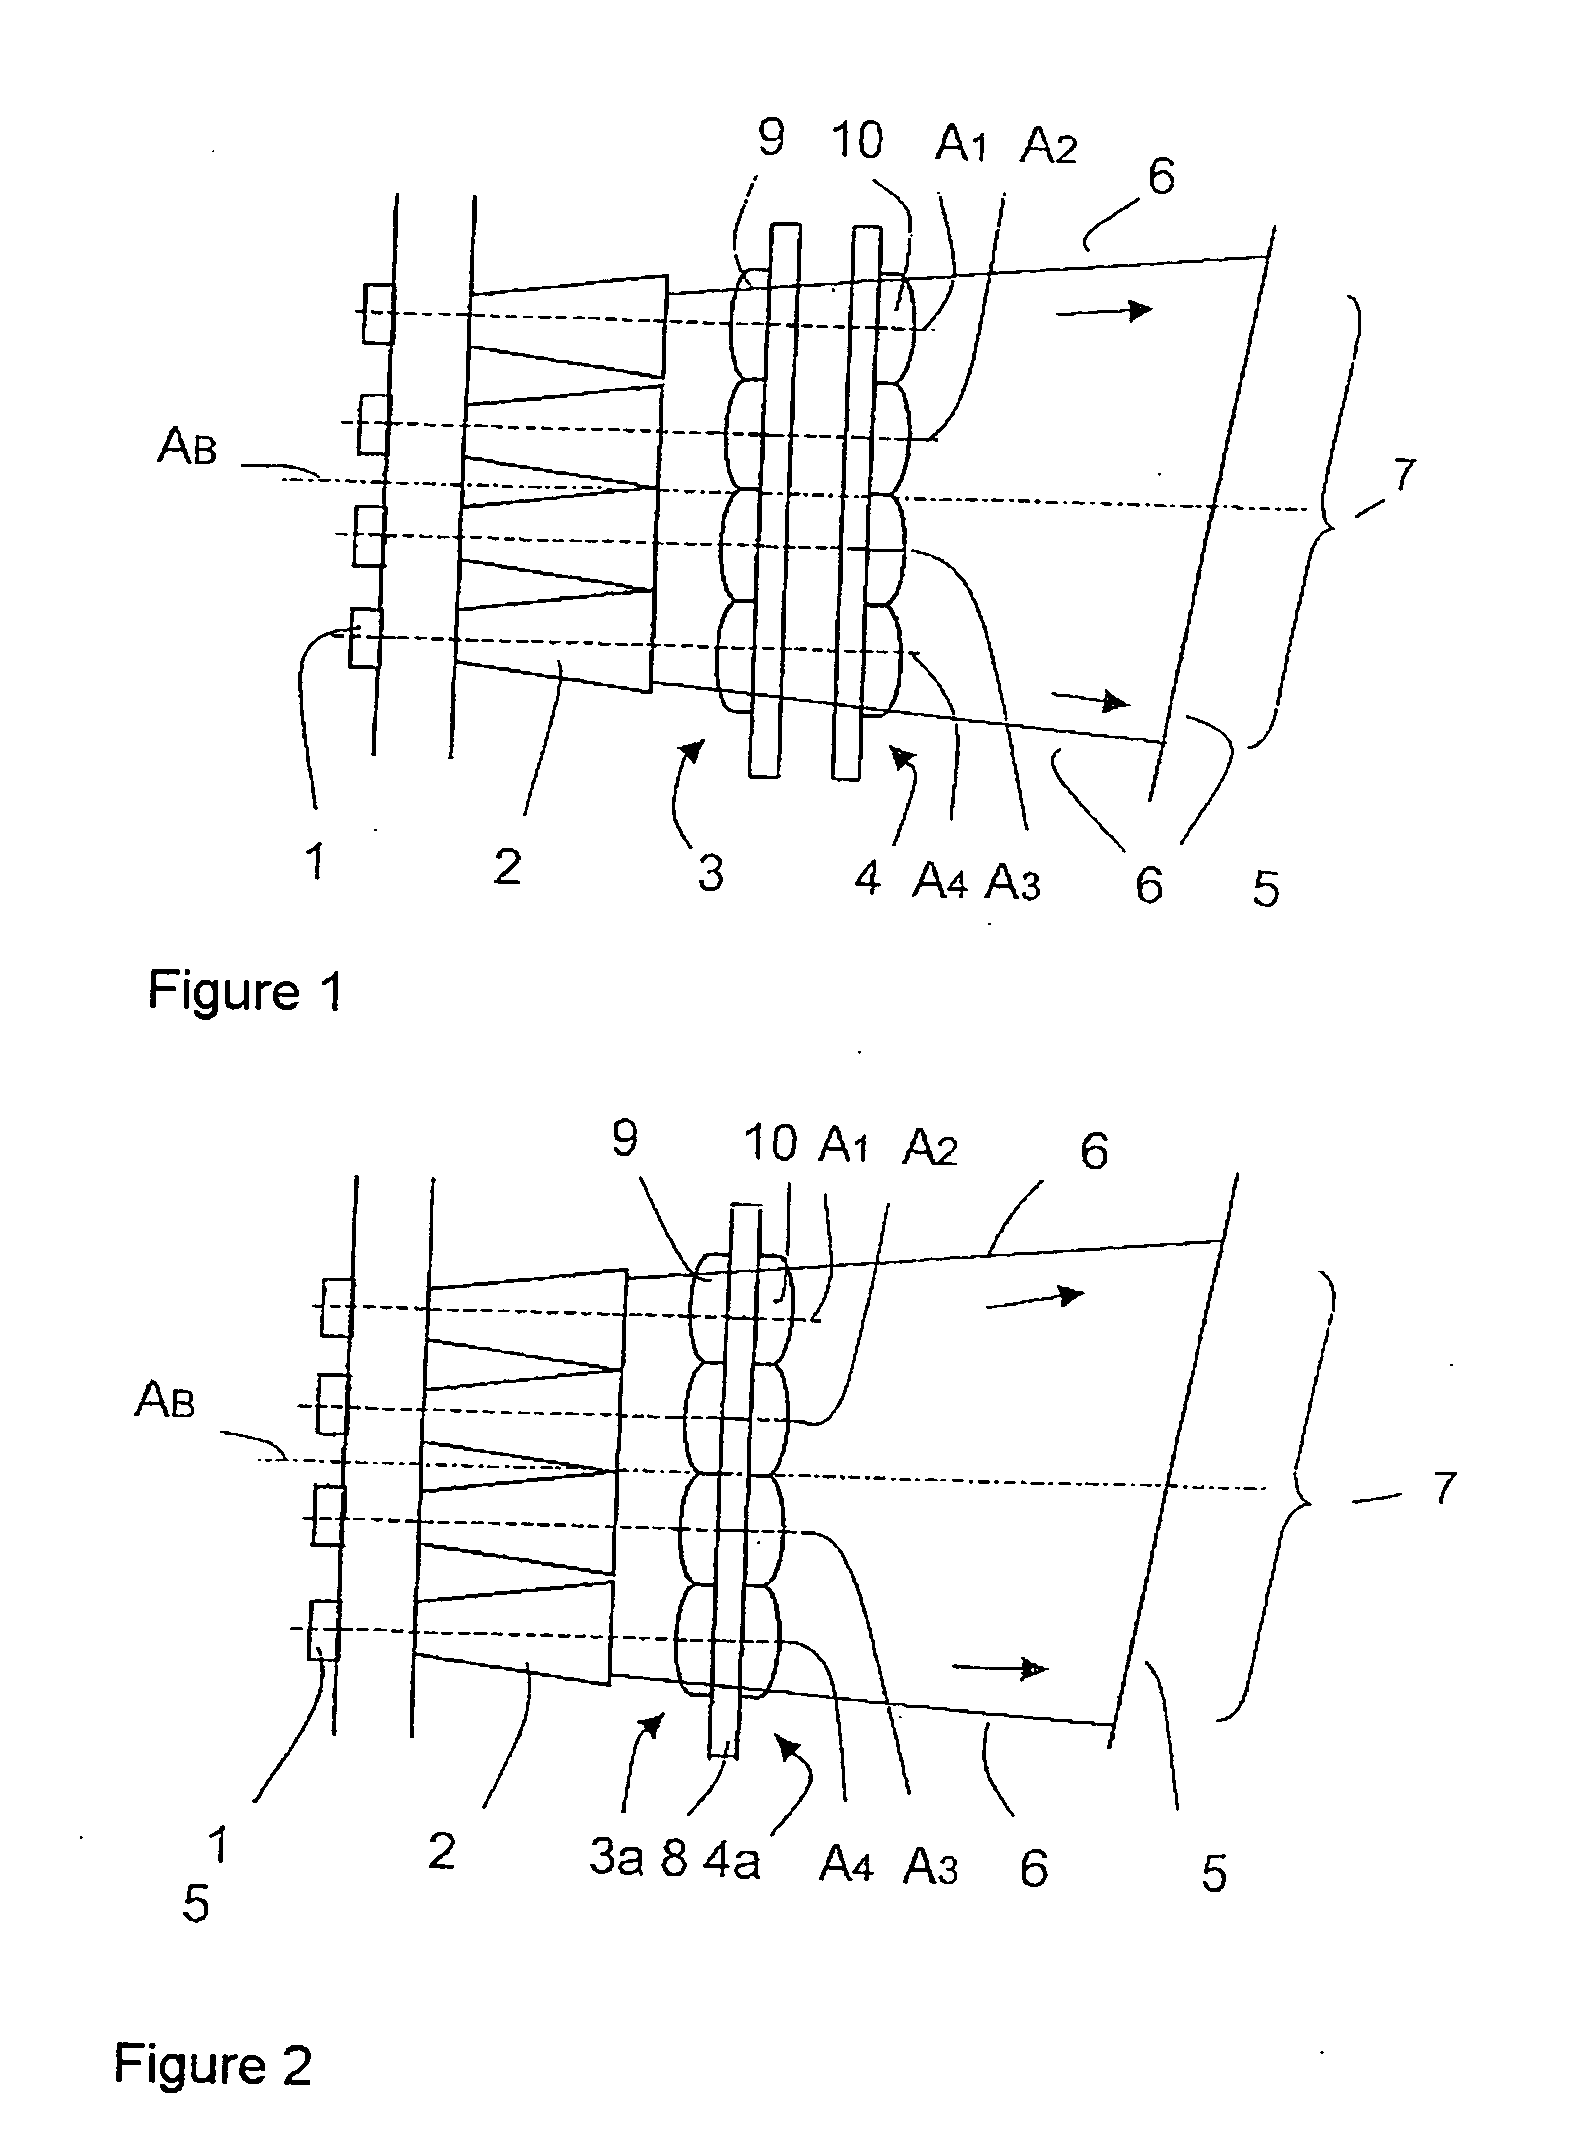 Arrangement for the illumination of an image plane